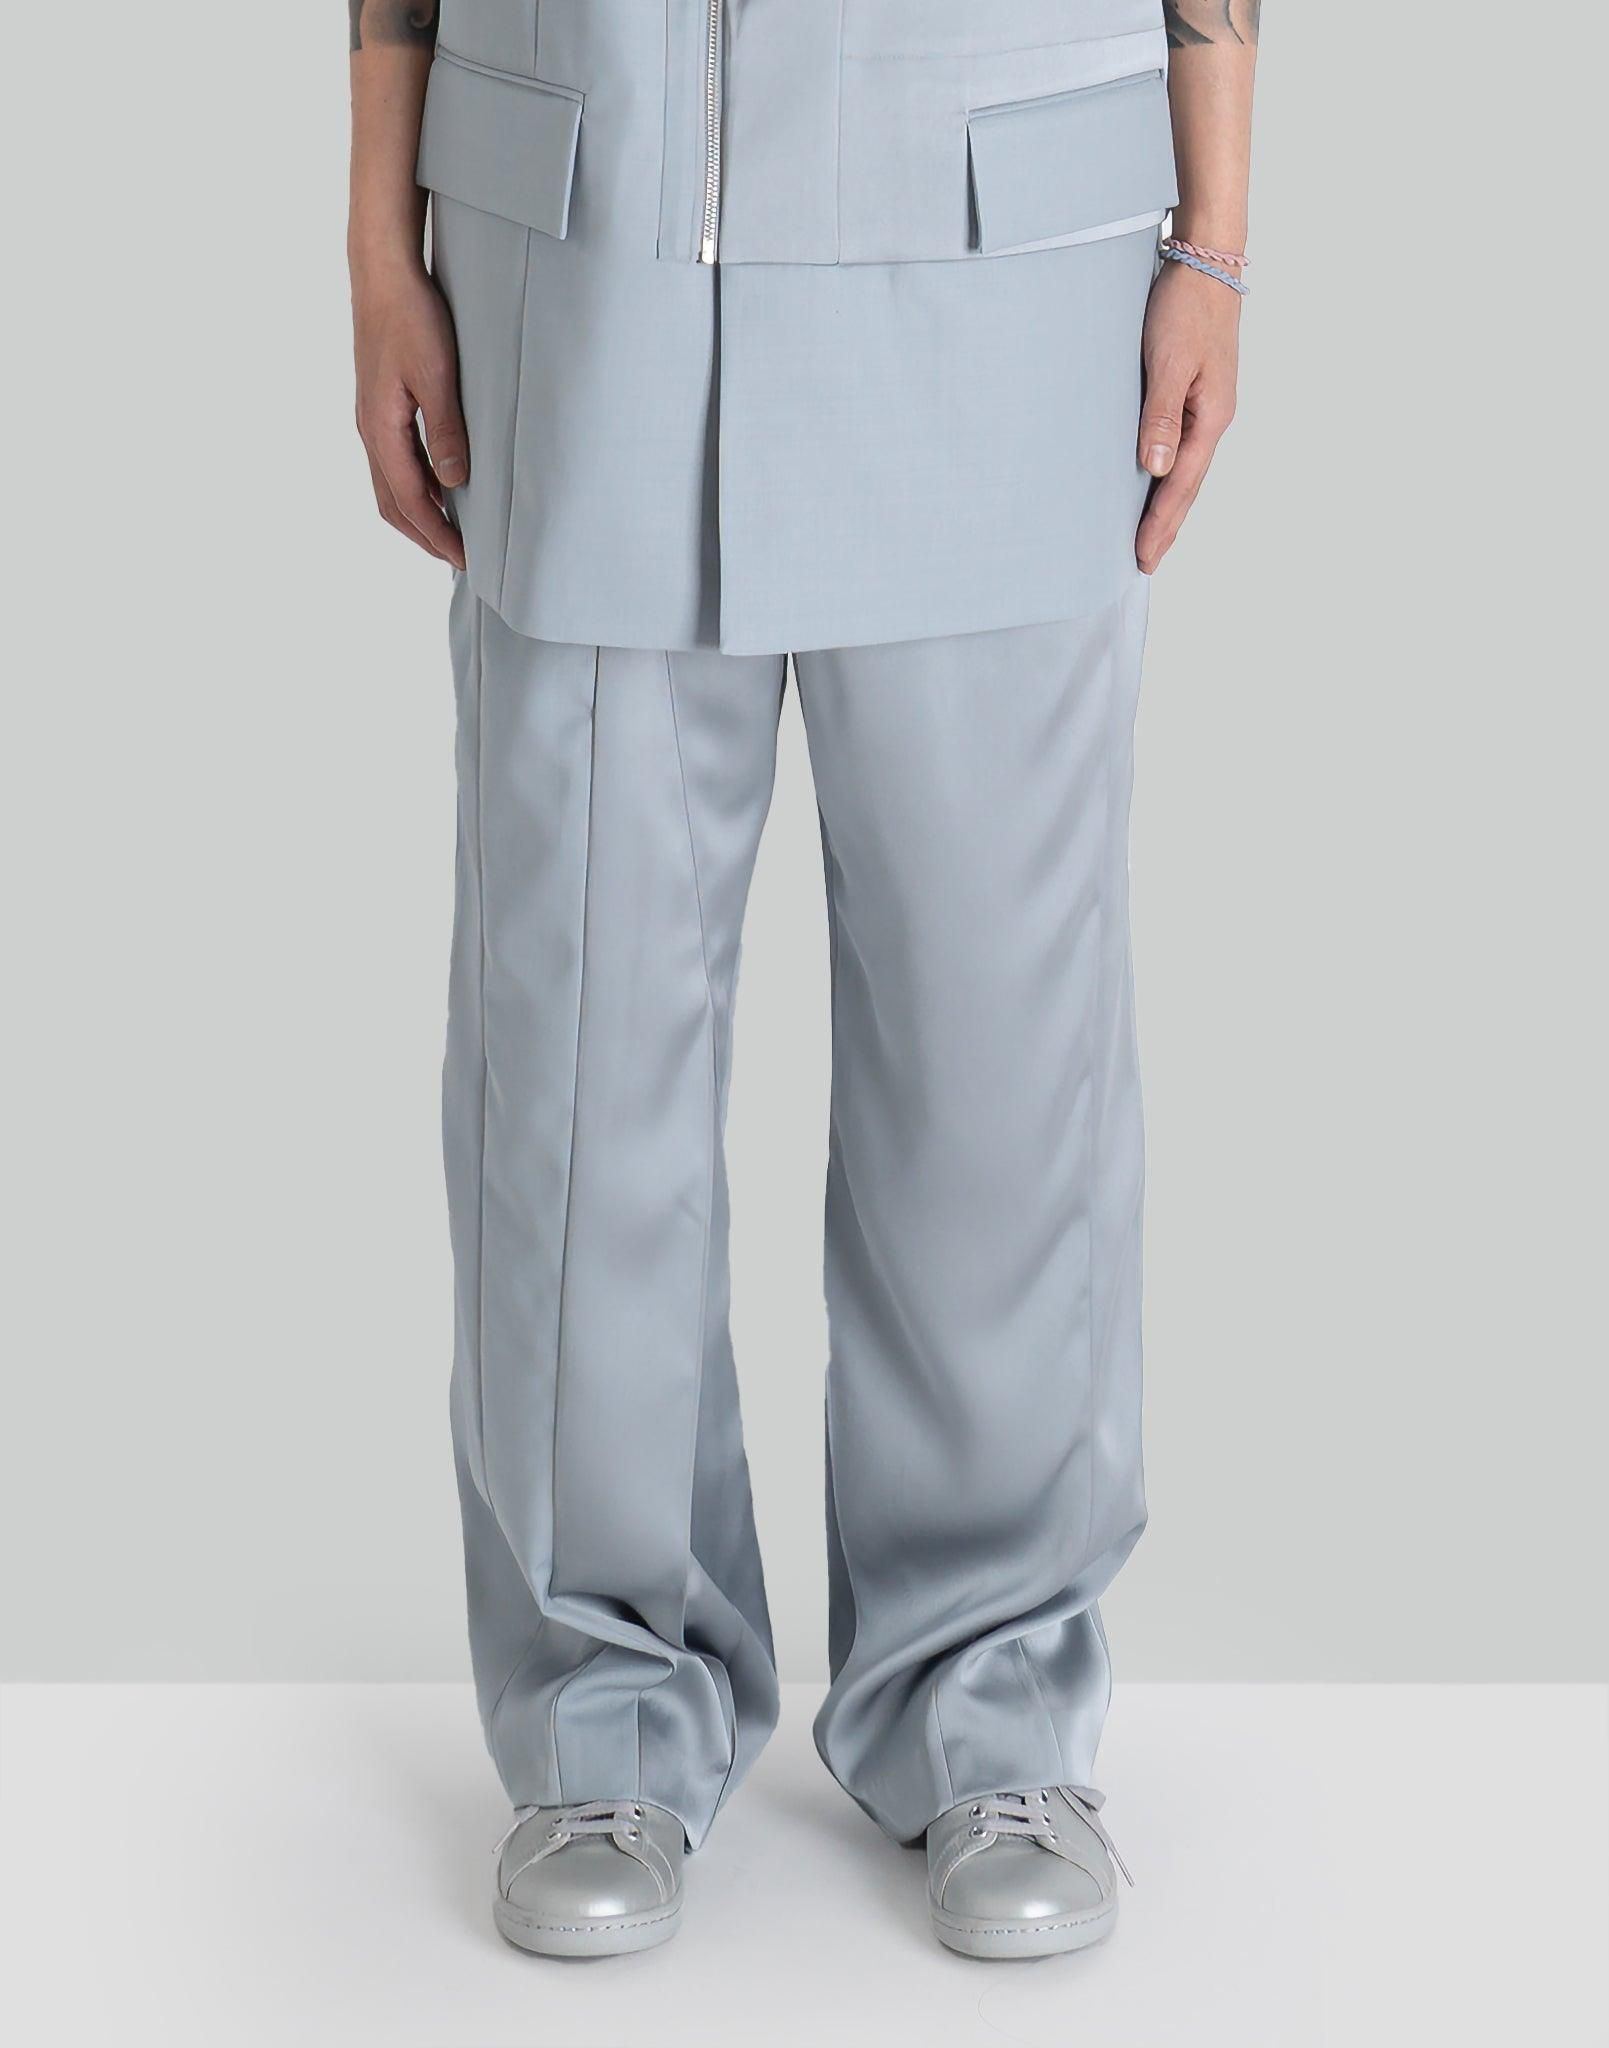 FENG CHEN WANG PLEATED SUIT TROUSERS – 082plus